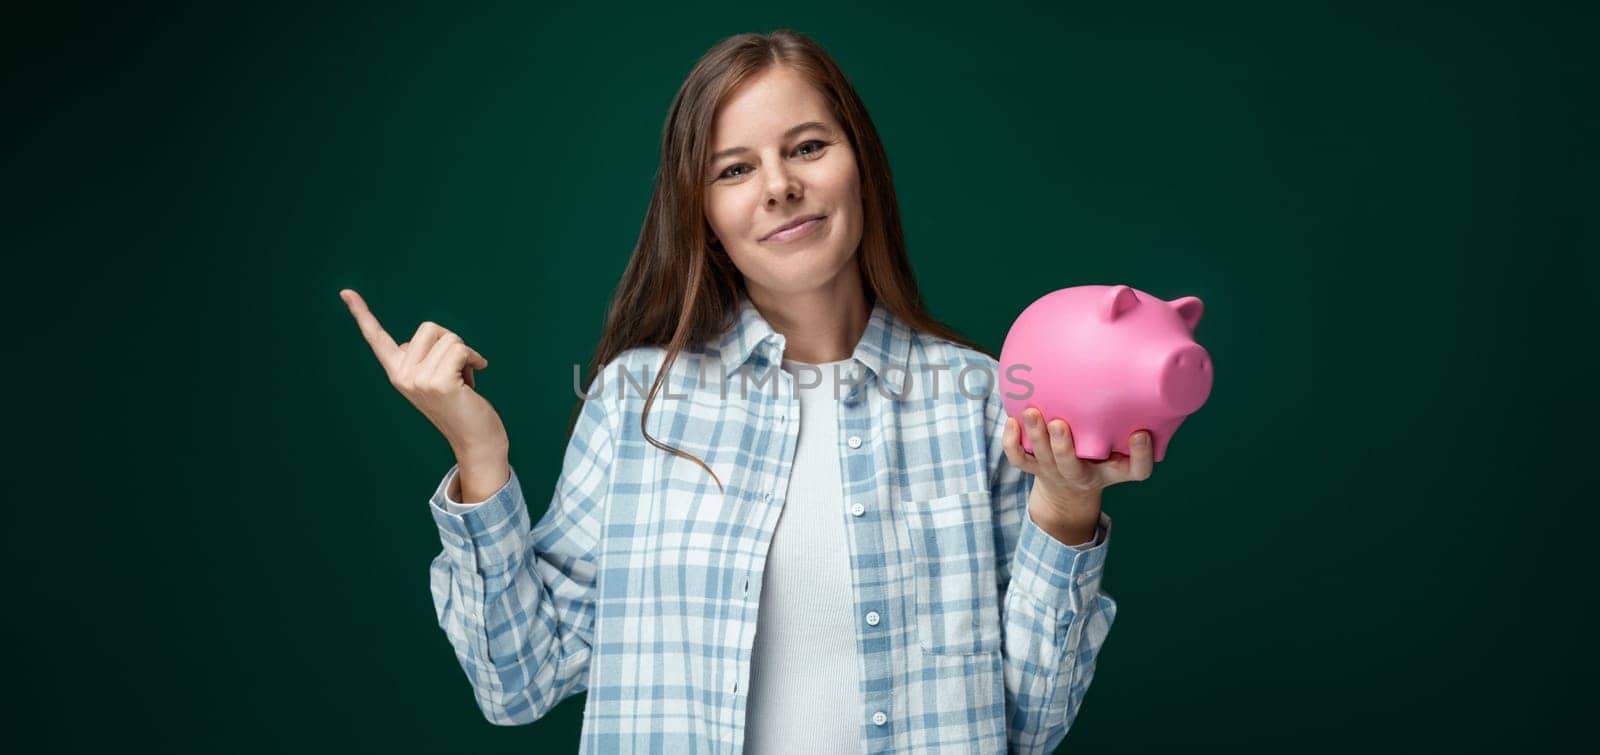 Charming young woman with brown hair holding a piggy bank and pointing her finger up by TRMK